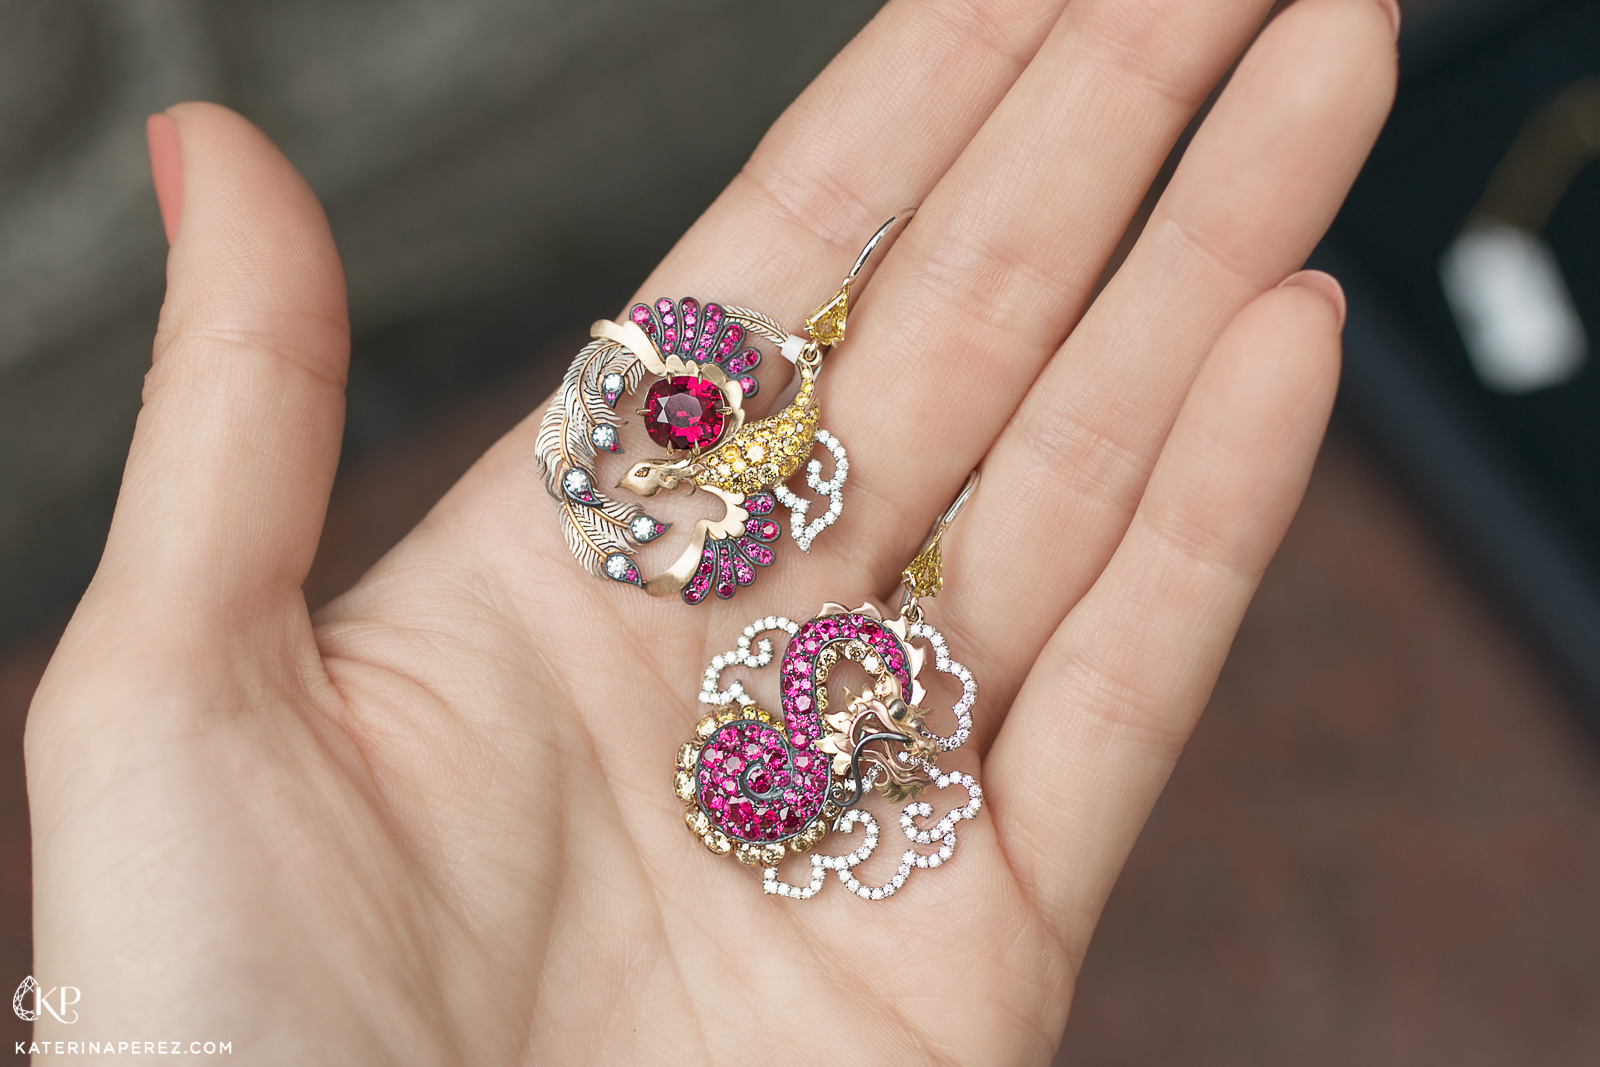 David Michael earrings with rubies, yellow diamonds and colourless diamonds in 18k yellow and black gold